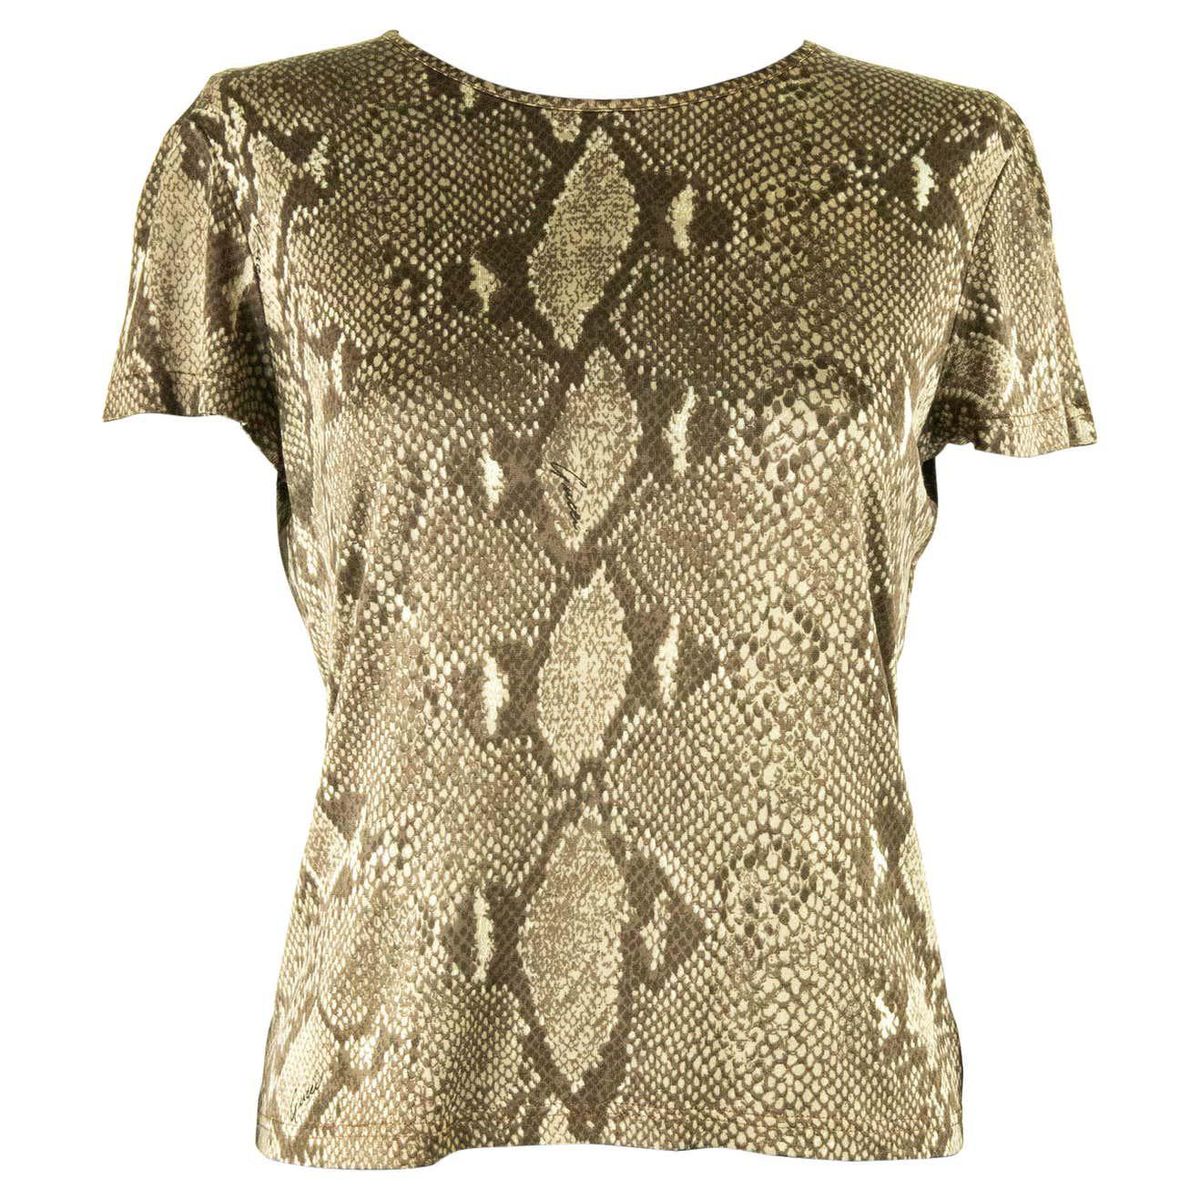 Tom Ford for Gucci SS 2000 Snakeskin Jersey T-shirt